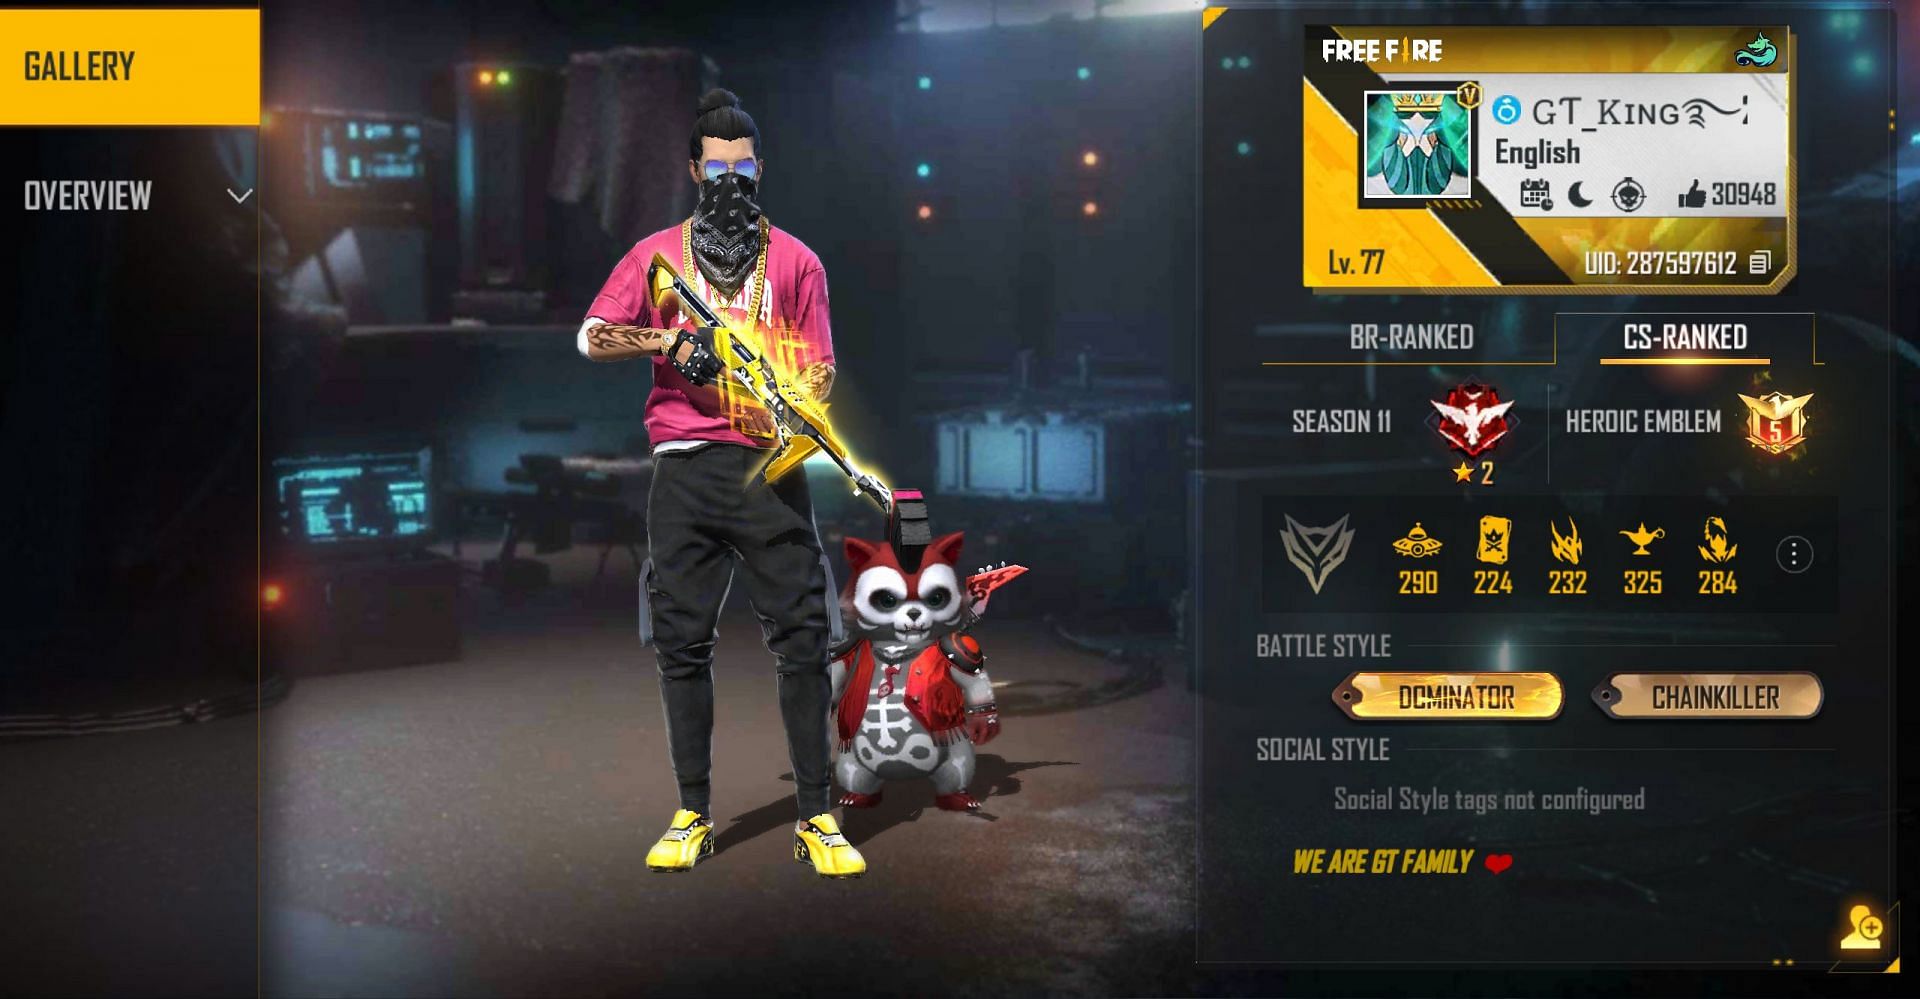 This is GT King&#039;s Free Fire ID and he has the V Badge (Image via Garena)